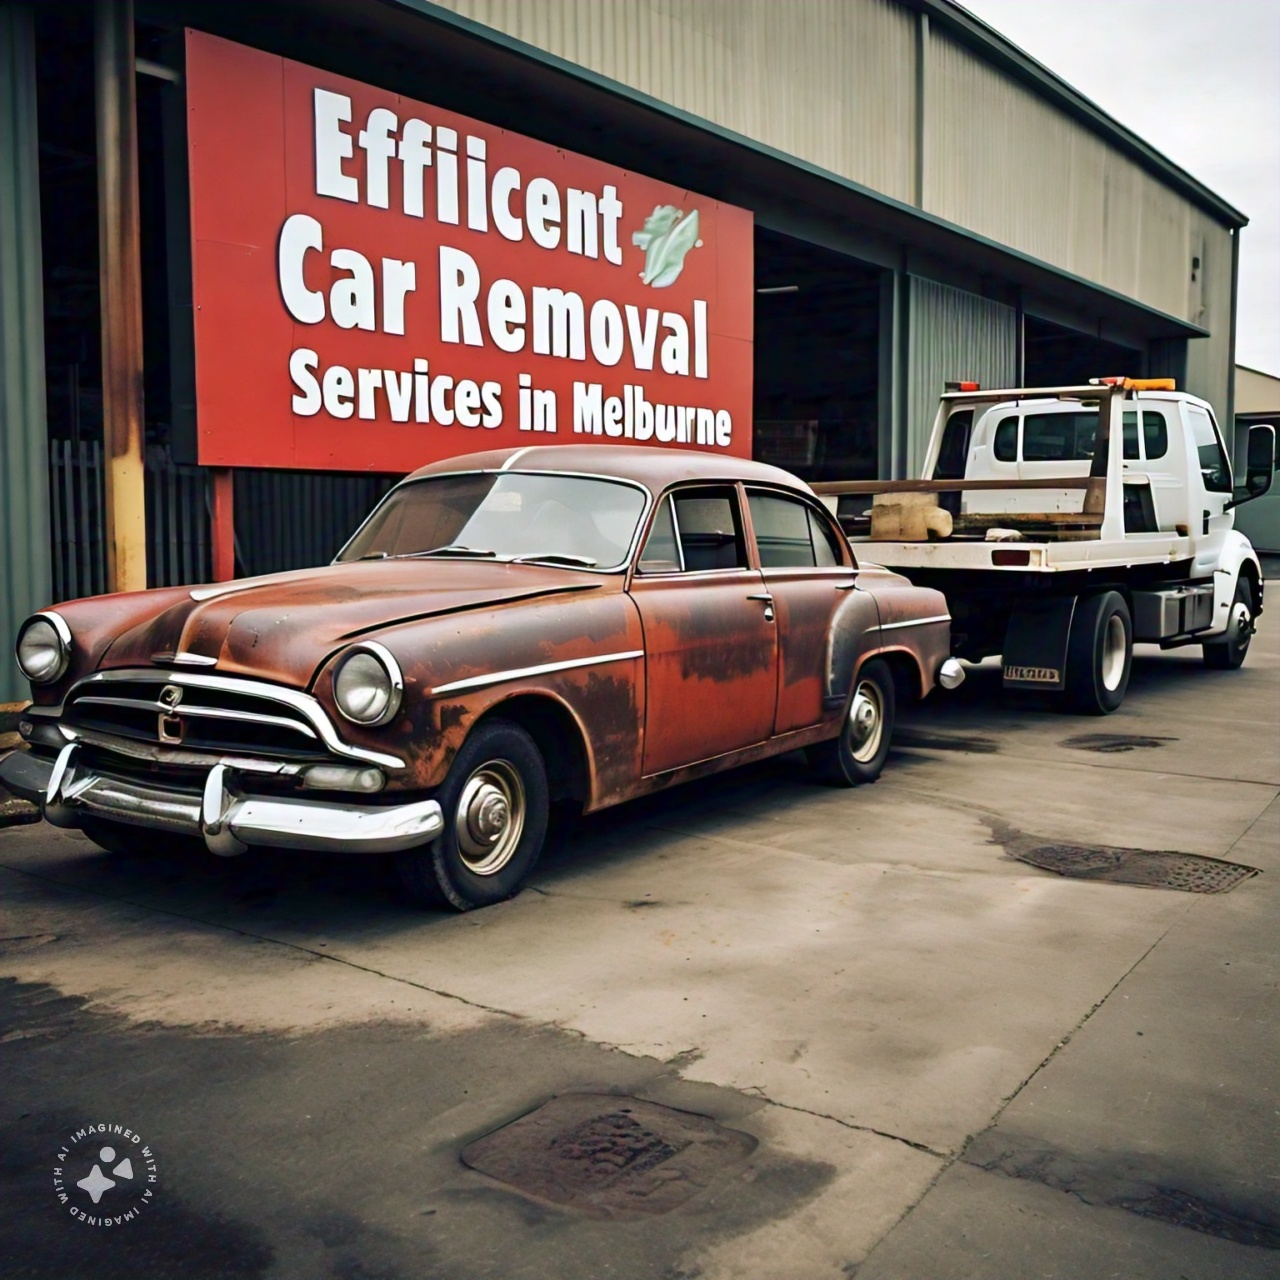 Old Car: Efficient Car Removal Services in Melbourne